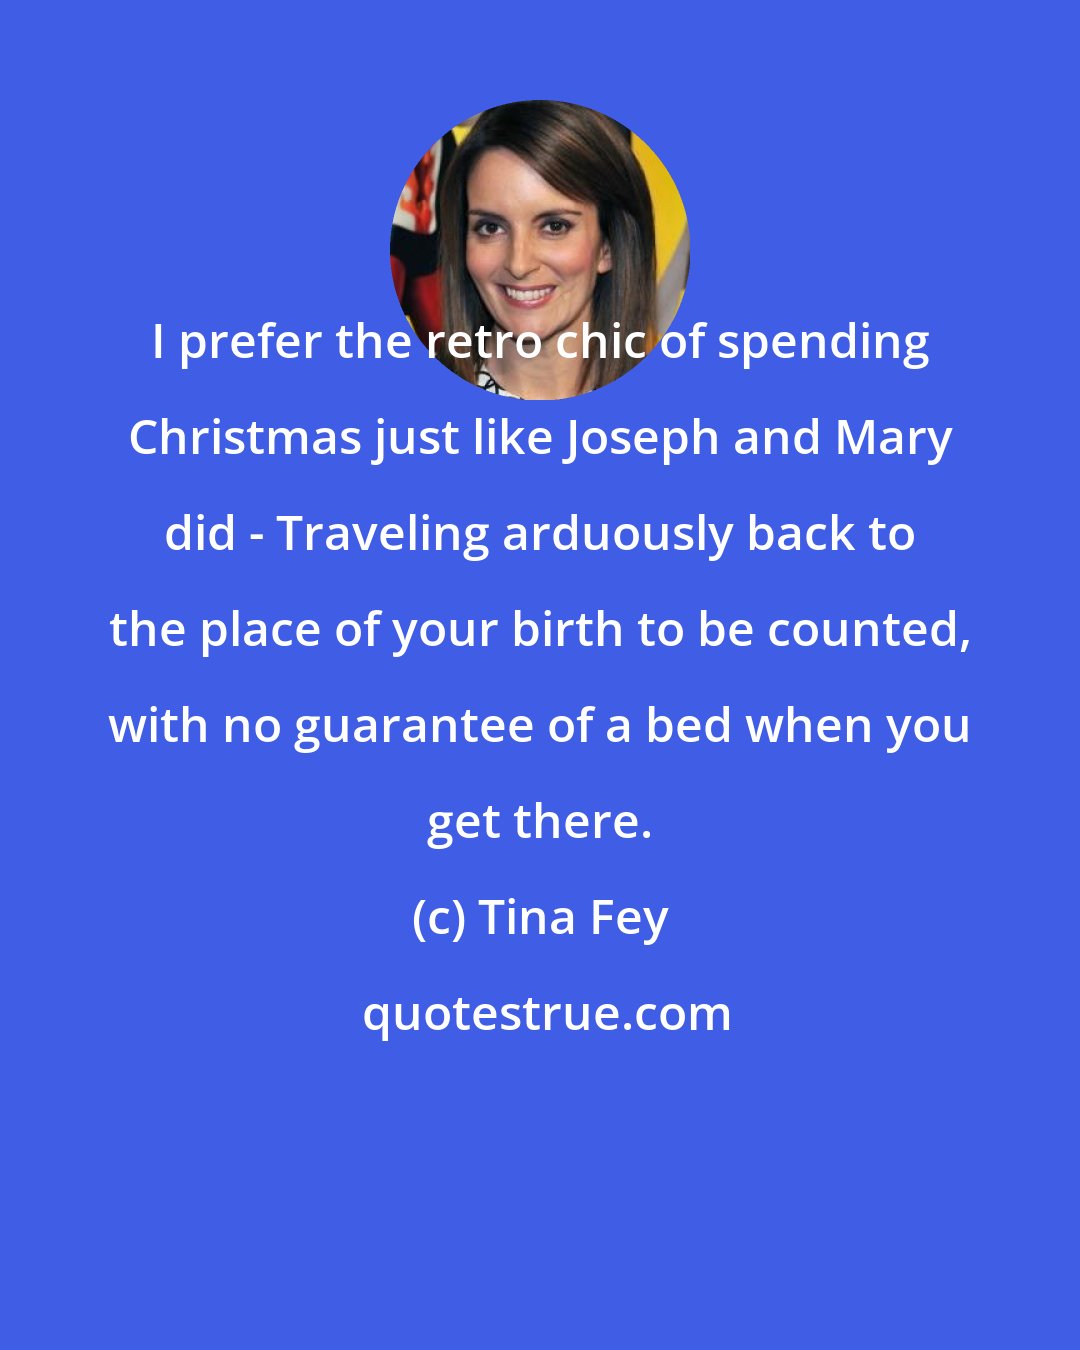 Tina Fey: I prefer the retro chic of spending Christmas just like Joseph and Mary did - Traveling arduously back to the place of your birth to be counted, with no guarantee of a bed when you get there.